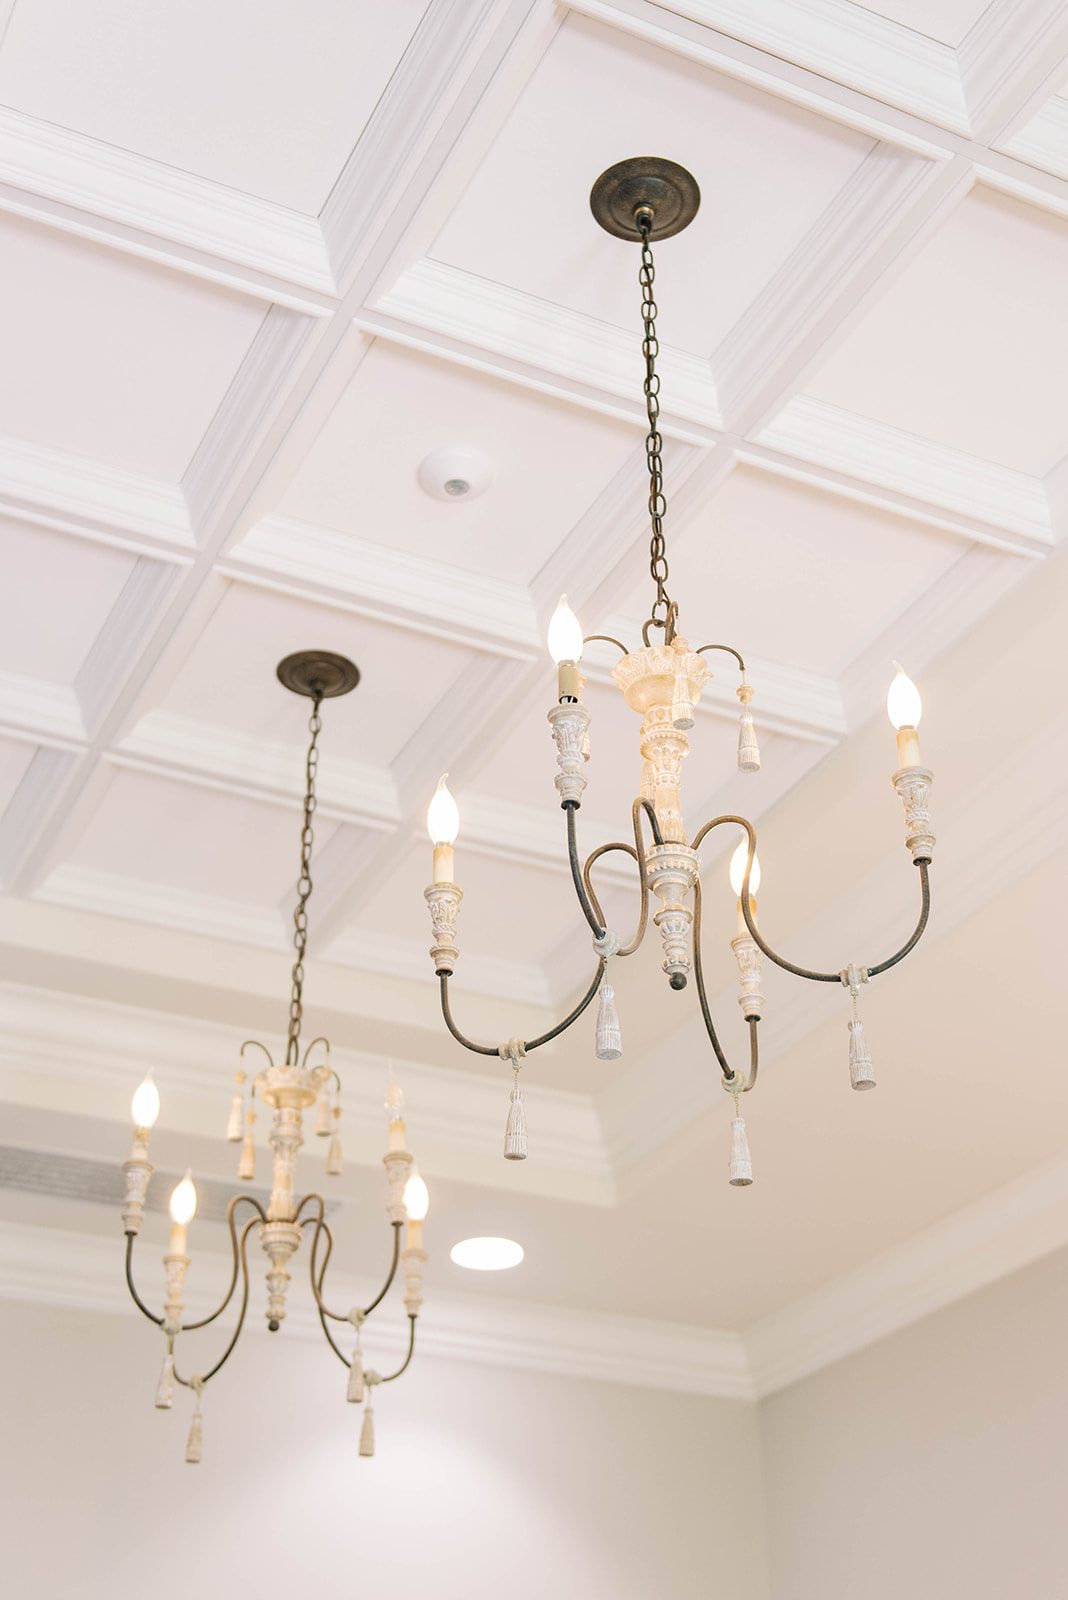 Harborview Chapel elegant details on the ceiling with simple chandeliers and crown molding